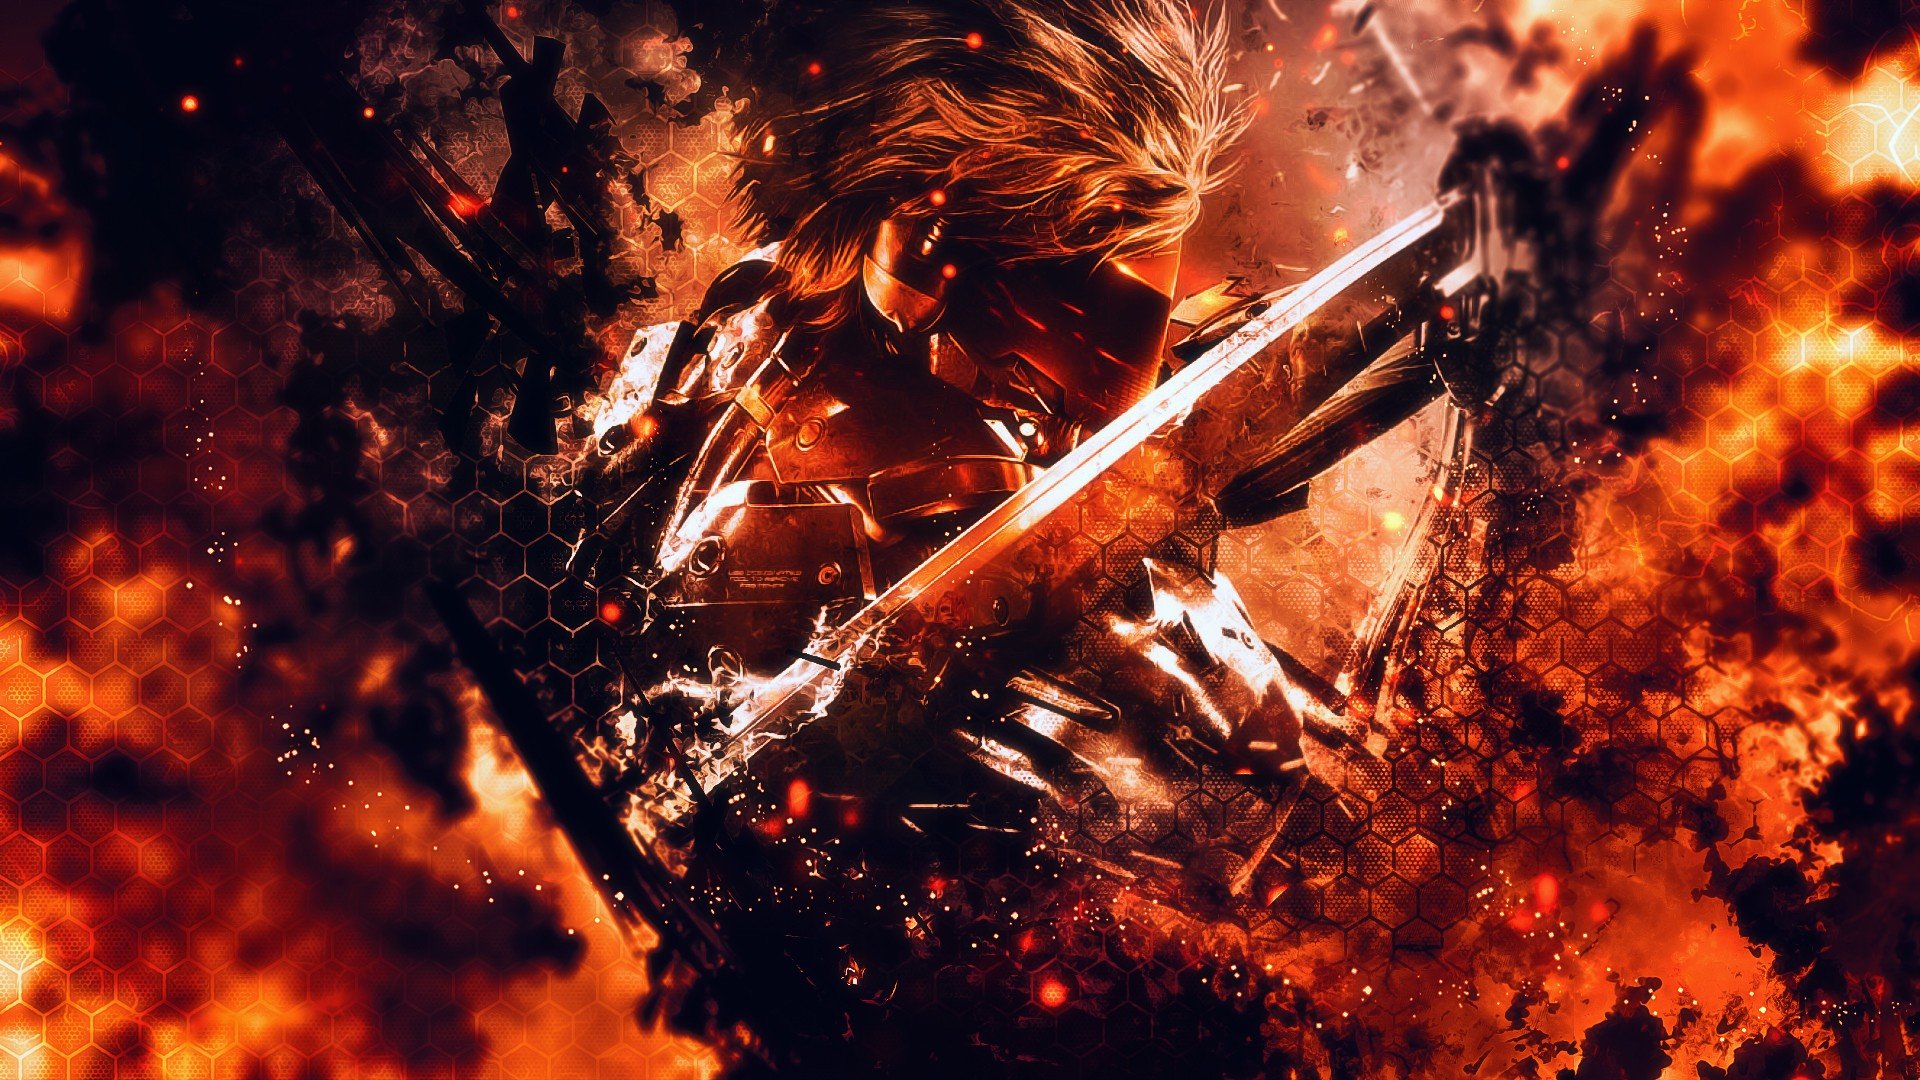 Awesome Metal Gear Rising: Revengeance (MGR) free background ID:130566 for full hd desktop